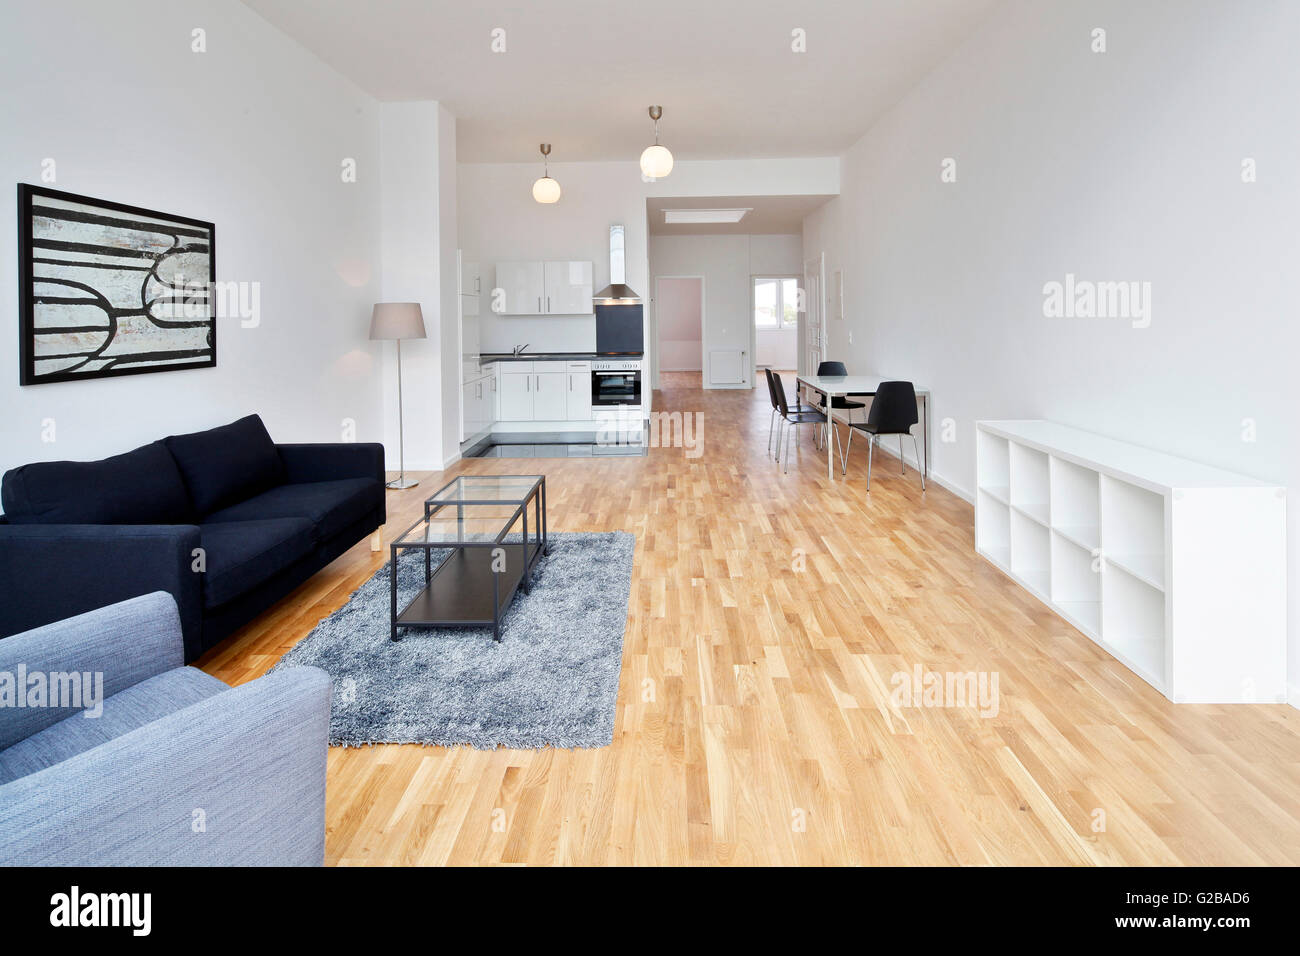 Conversion of Dach or Loft Space in Reichenberger Strasse, Kreuzberg. Open plan loft living. View of a modern living area and kitchen with modern dining table. Wood floors and white walls. Minimal decoration. Stock Photo